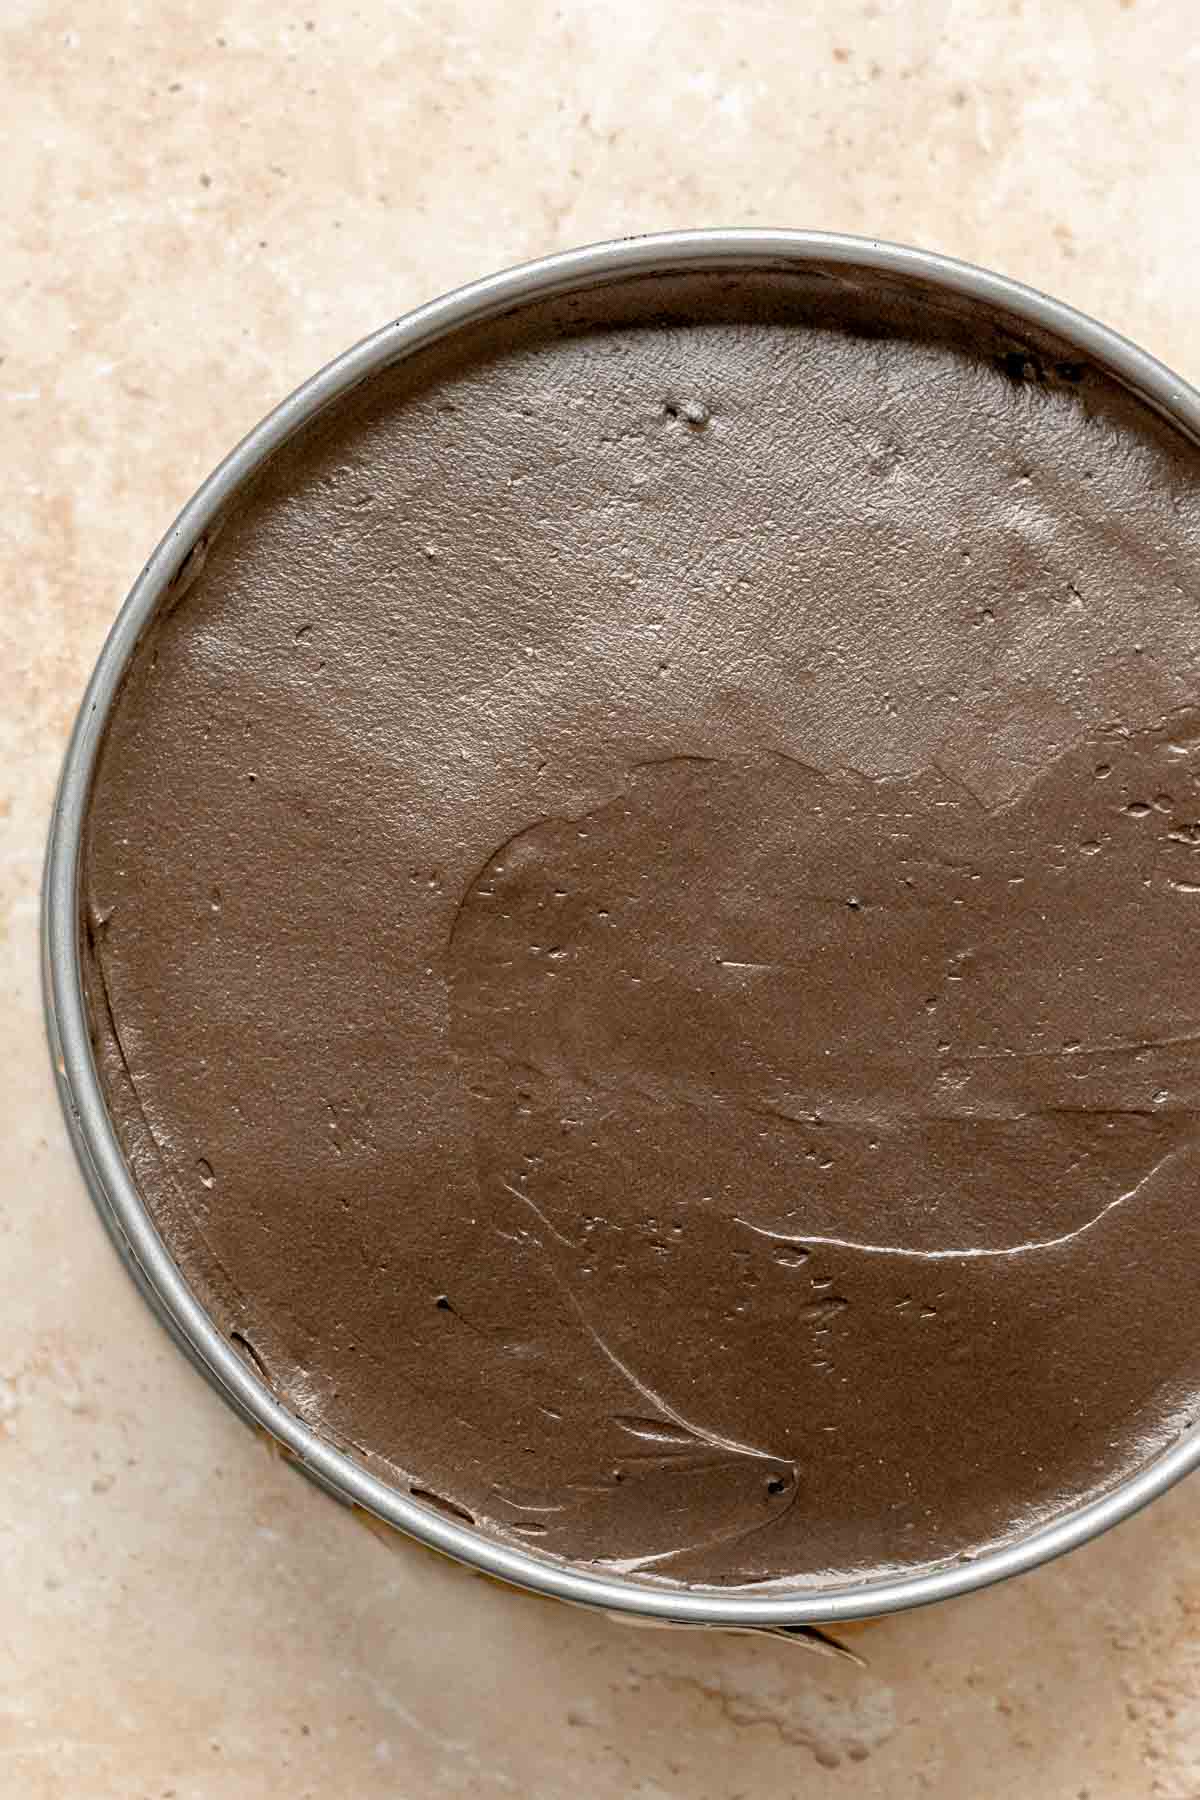 Smoothed chocolate cheesecake batter in a springform pan.